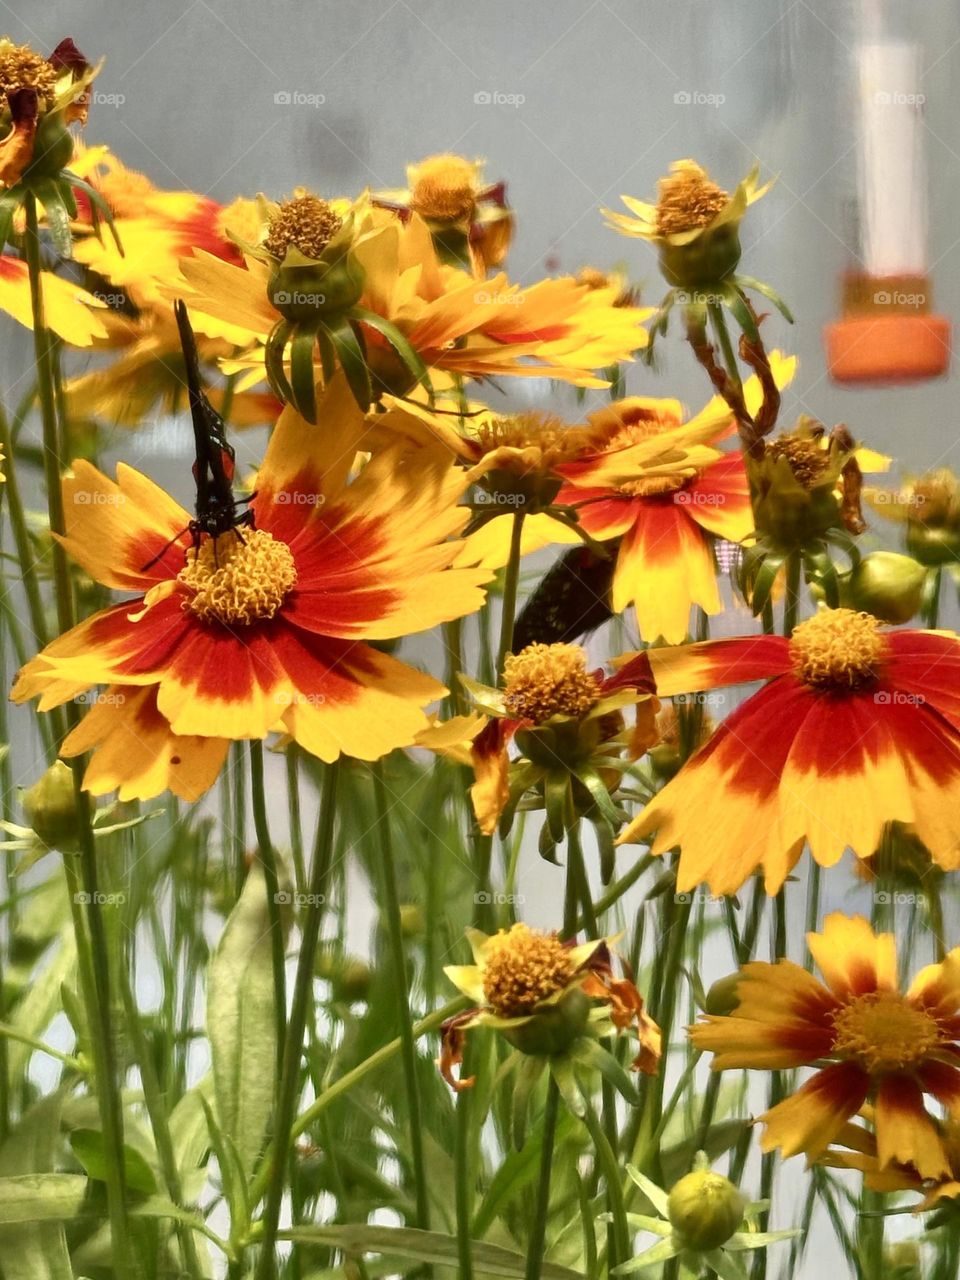 Coreopsis is a sunny flower that graces roadsides, fields, and many gardens across the United. States. This native perennial is also Florida's state wildflower. Butterflies are attracted to them. 